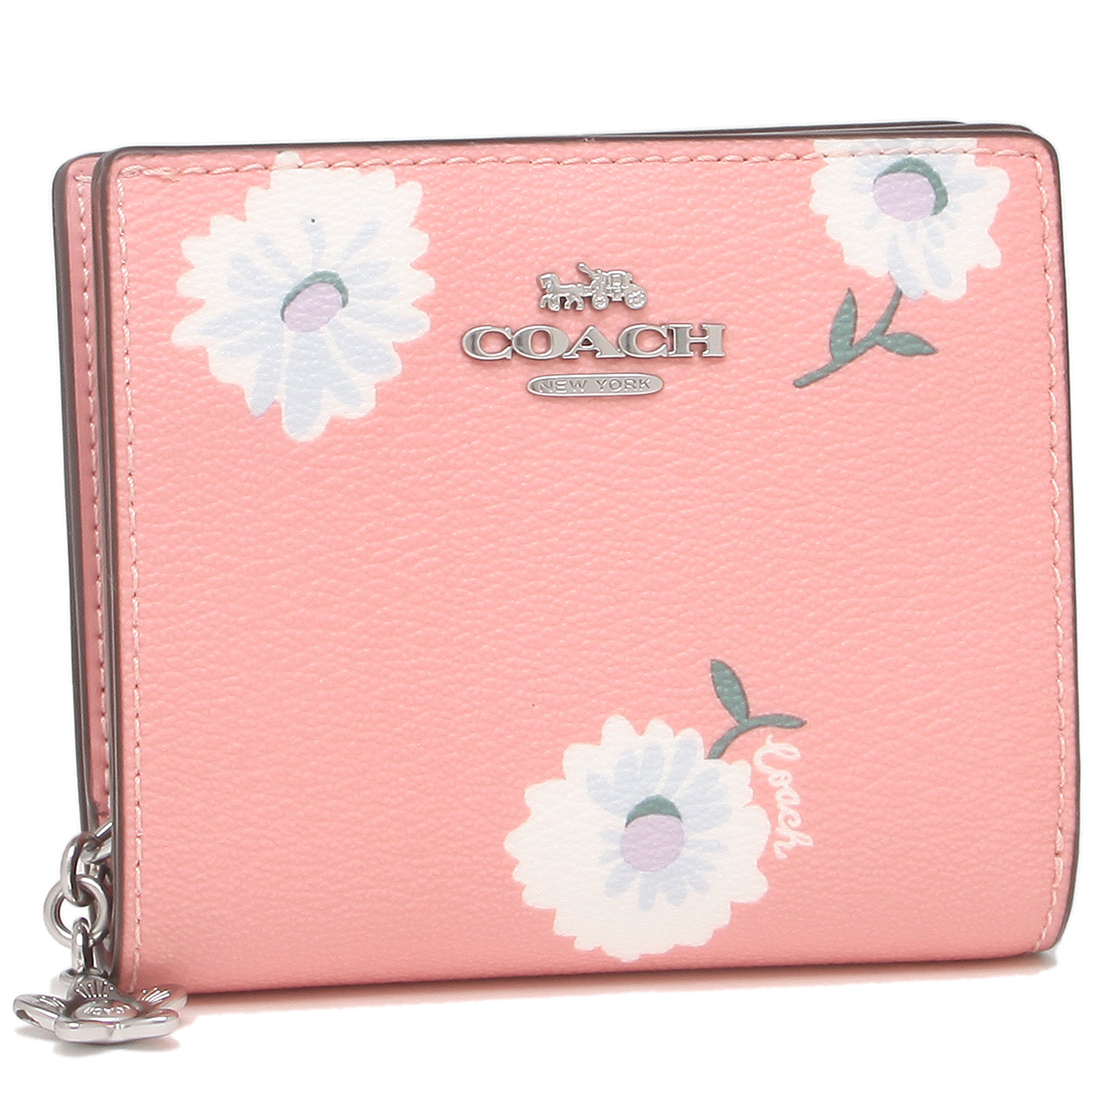 VÍ NỮ NGẮN LIMITED COACH BOXED SNAP WALLET WITH DAISY PRINT C2889 12